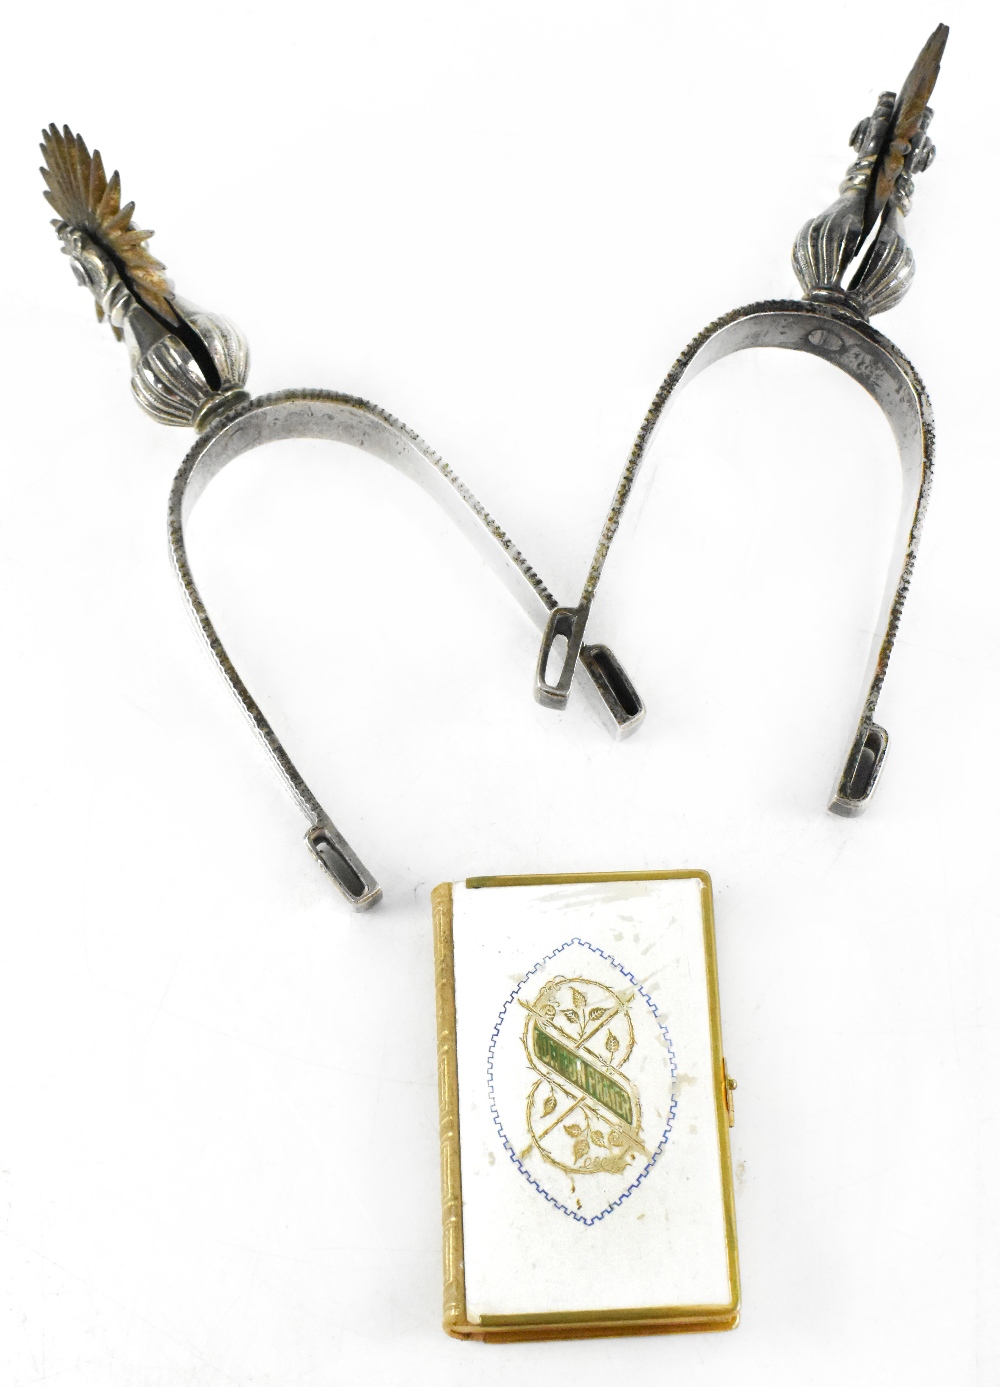 A pair of white metal officer's spurs and a book of 'Common Prayer and Administration of the